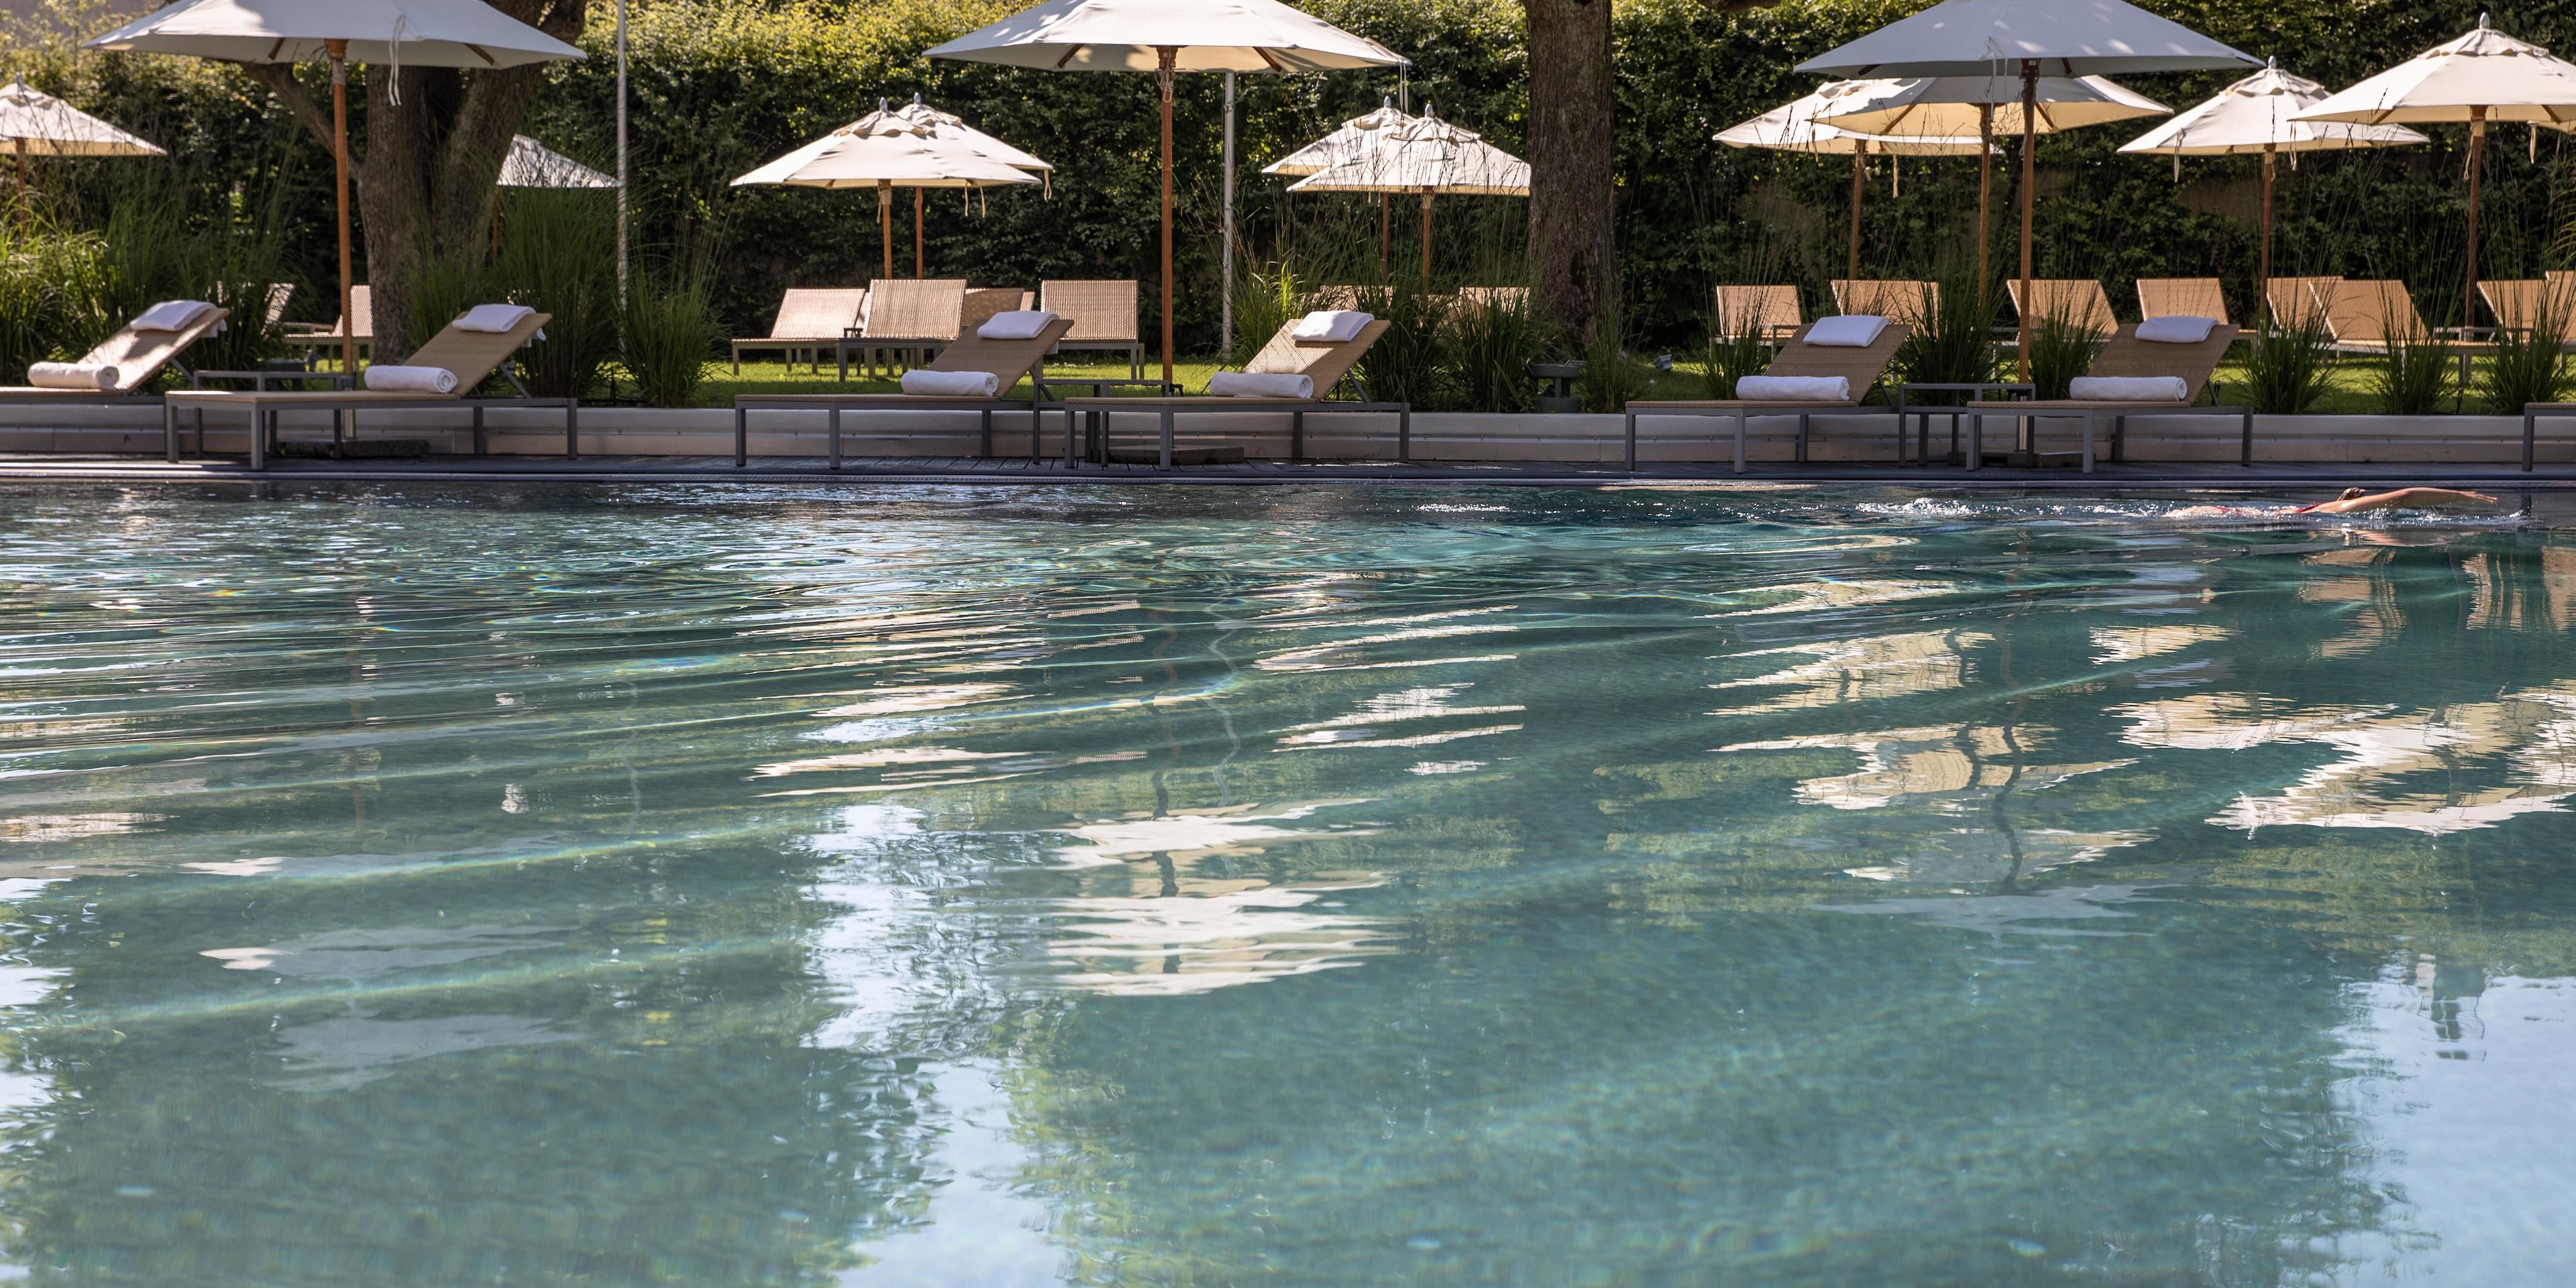 Sheltered from the noise of the city, at just a few steps from the heart of Geneva, the InterContinental Genève offers you a relaxing summer escape in an oasis of greenery. An opportunity to discover the city’s largest five-star hotel pool, 21 metres long, in the heart of 525 m2 of lush greenery.